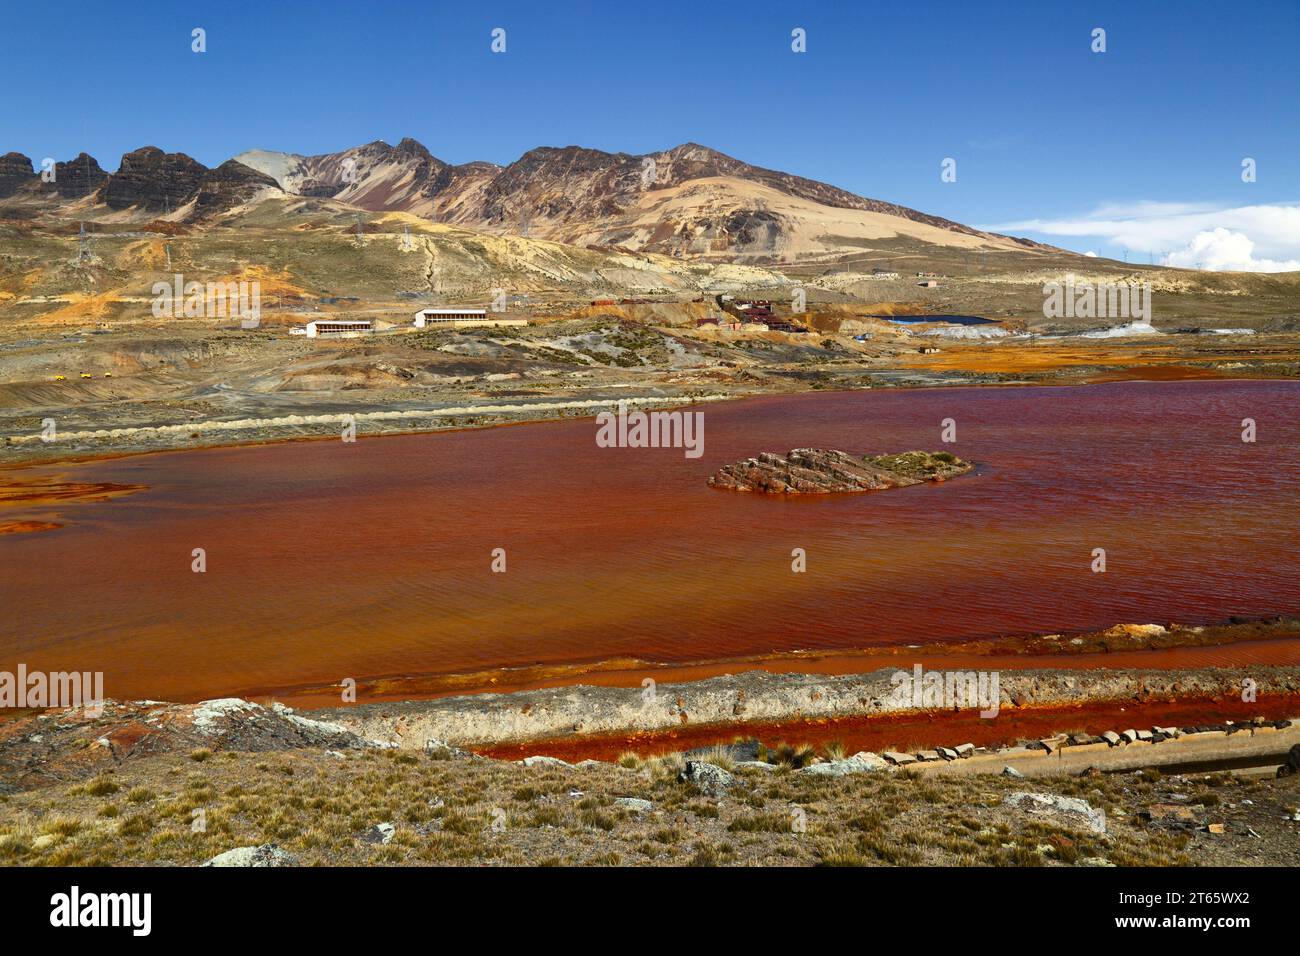 View across lake and aqueduct contaminated by acid mine drainage and industrial waste from the nearby tin mine at Milluni (part of which can be seen on the far bank and mountainside), near La Paz, Bolivia. The mountains are the foothills of the Mt Chacaltaya massif. Stock Photo